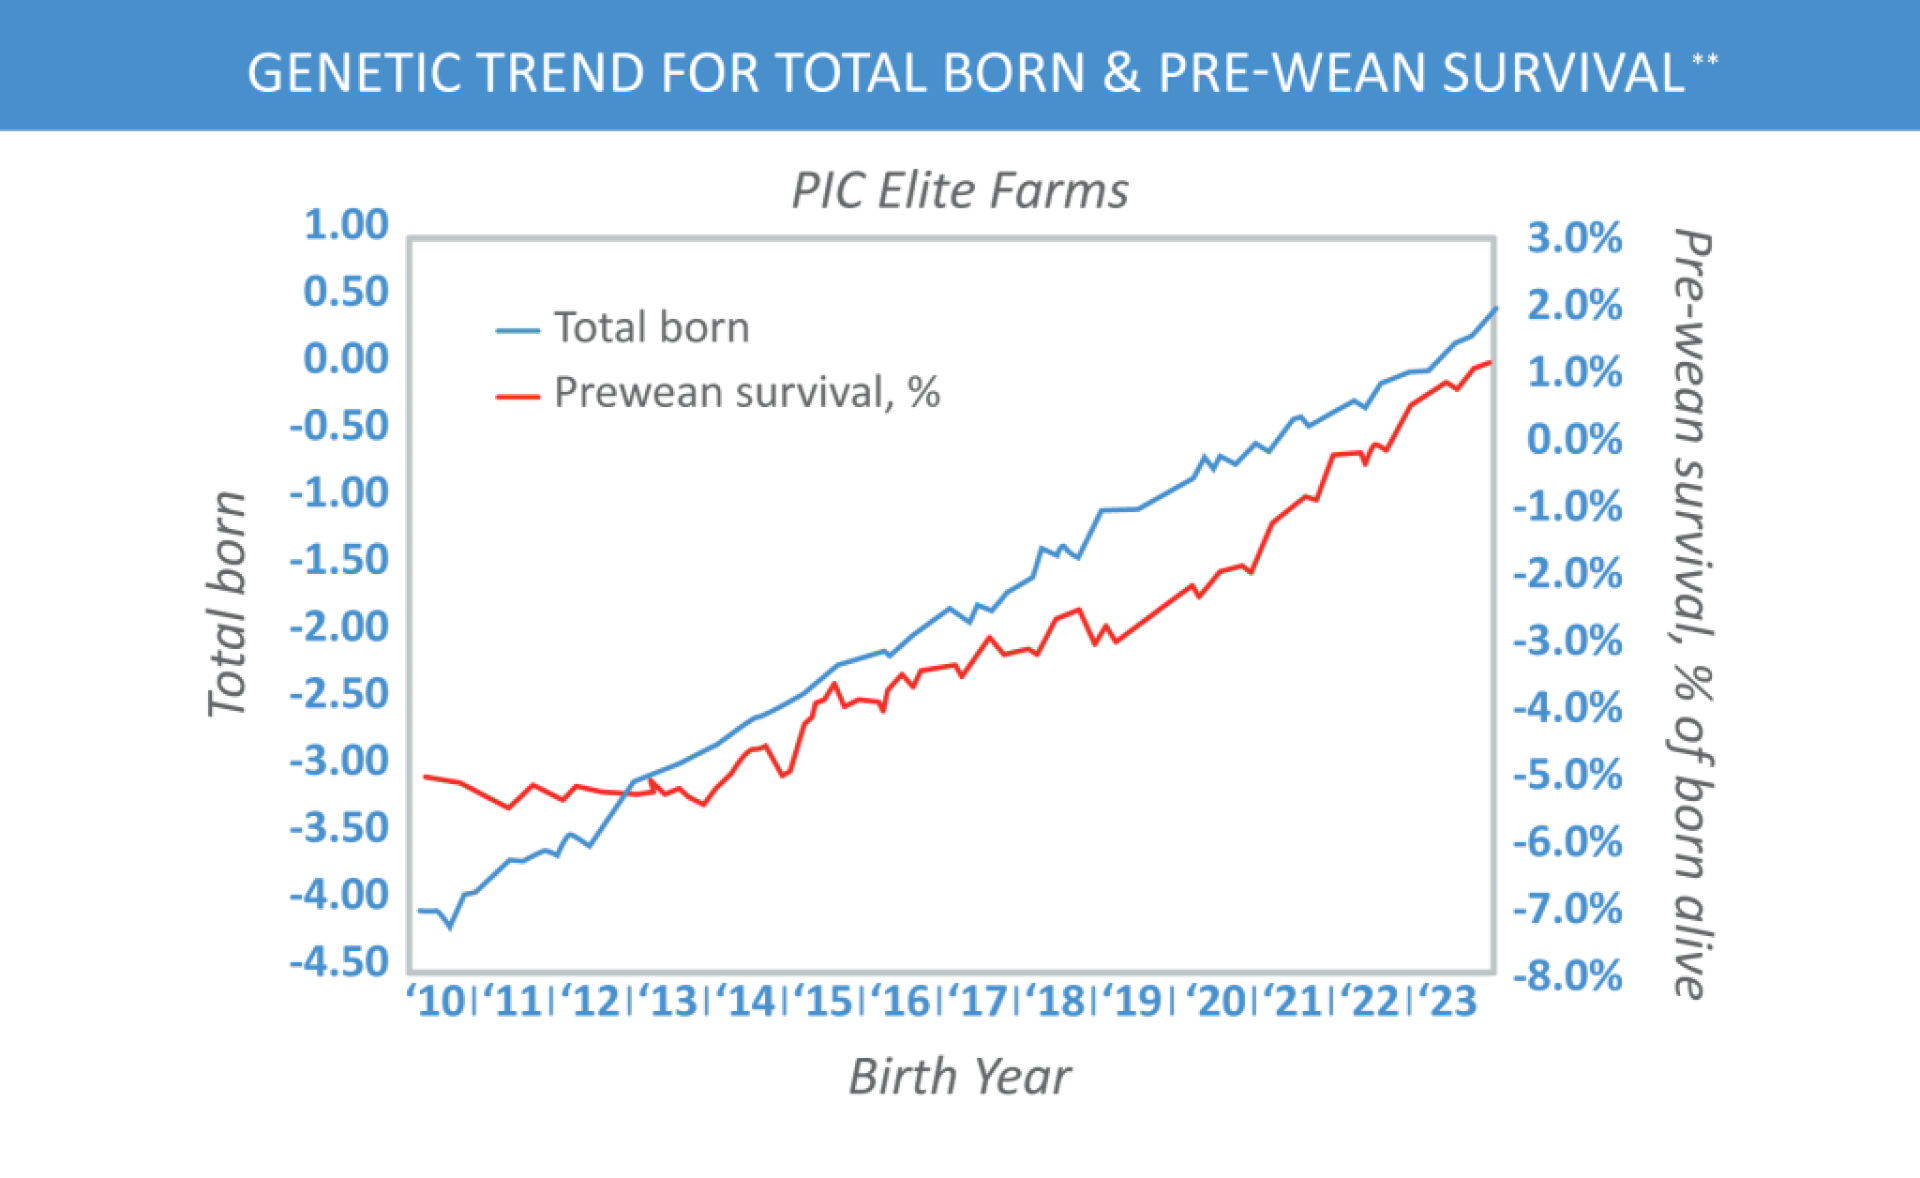 This graph shows the upward genetic trend for total born and pre-wean survival of piglets.